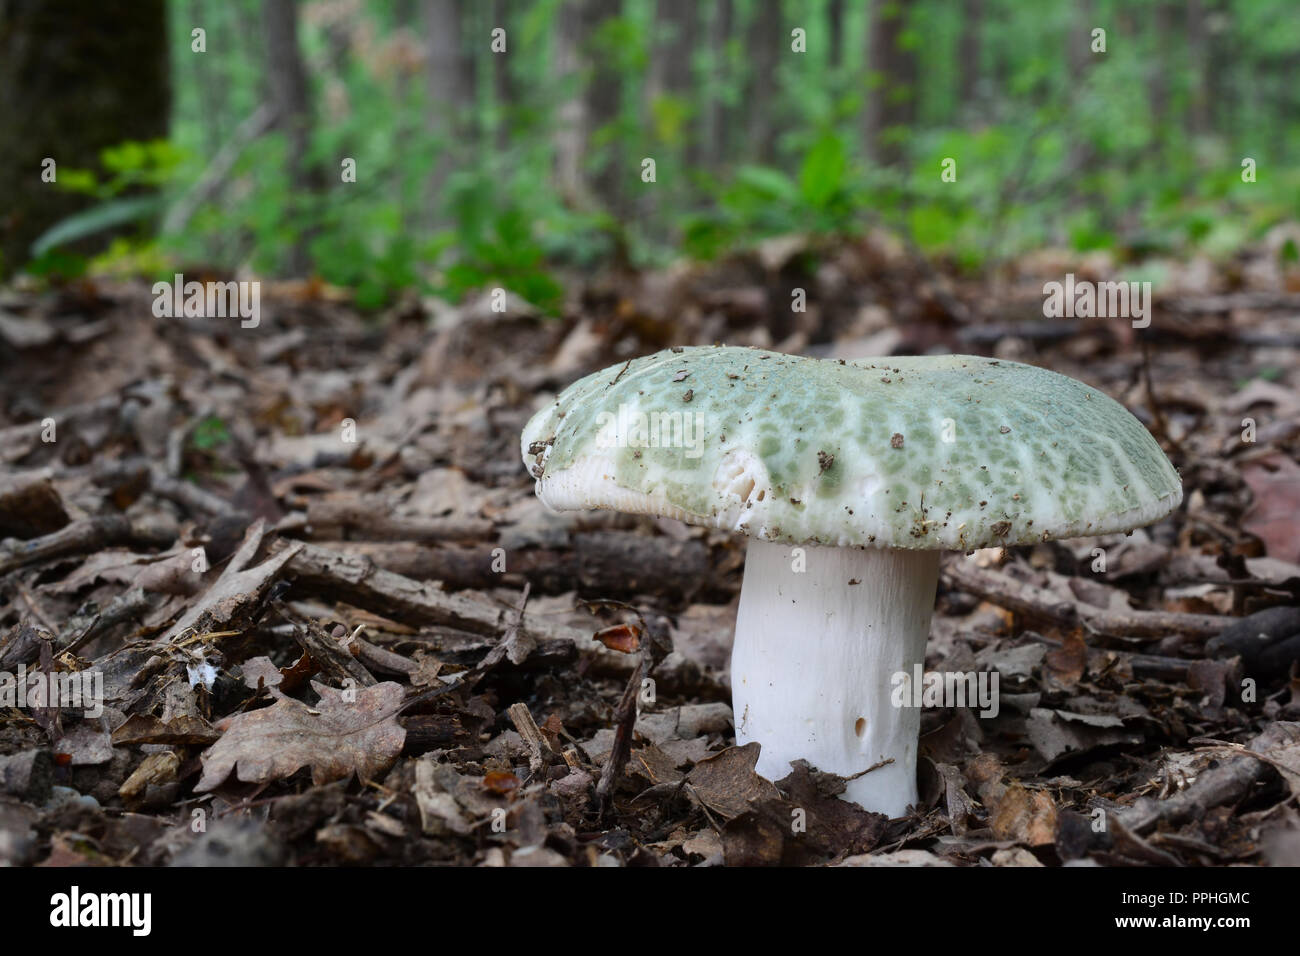 Close up view of nice specimen of Russula virescens  or Greencracked Brittlegill mushroom in natural habitat, old lowland oak forest Stock Photo